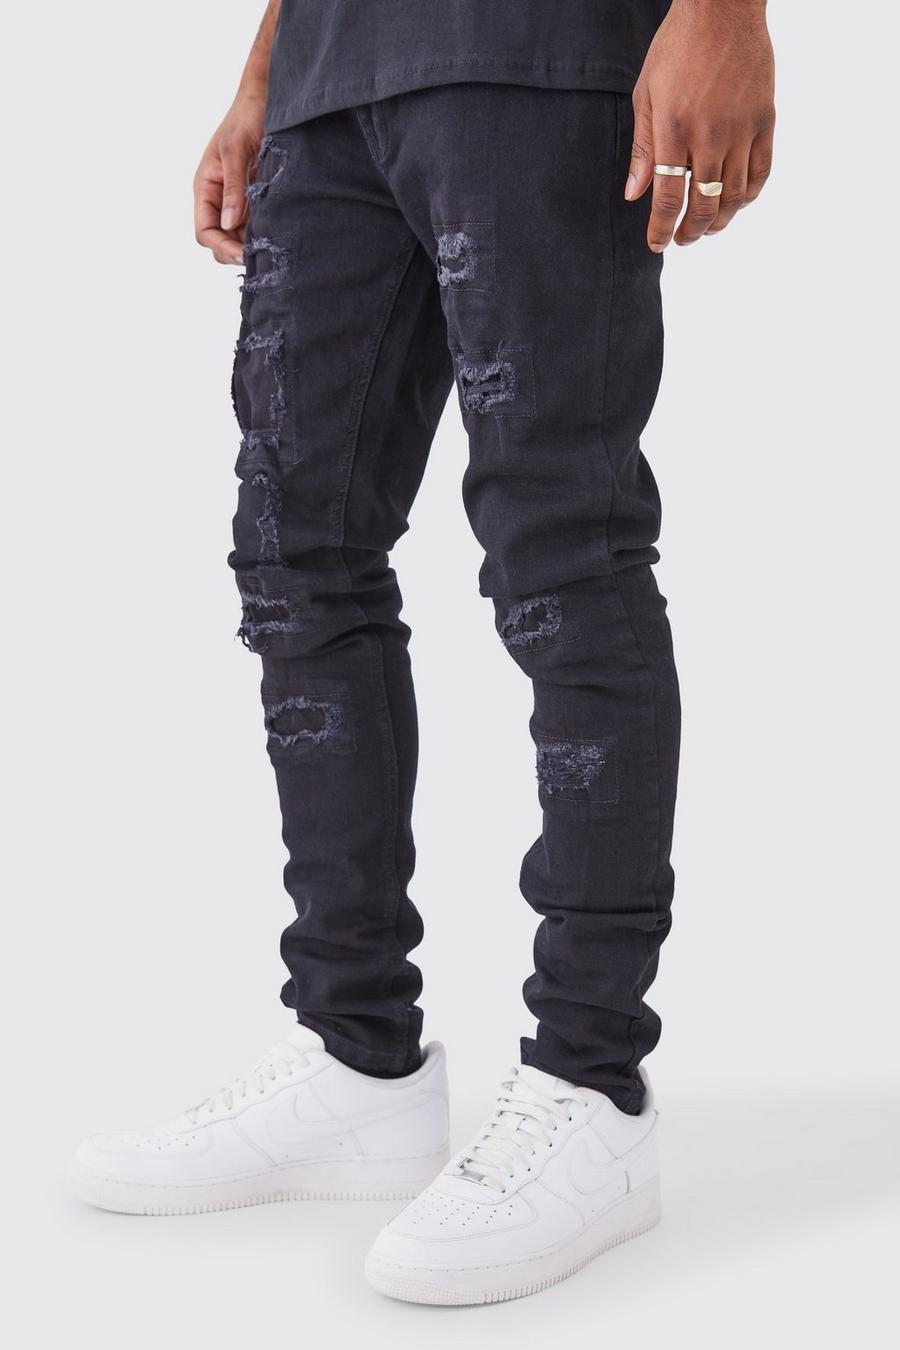 True black Tall Skinny Stacked Distressed Ripped Jeans